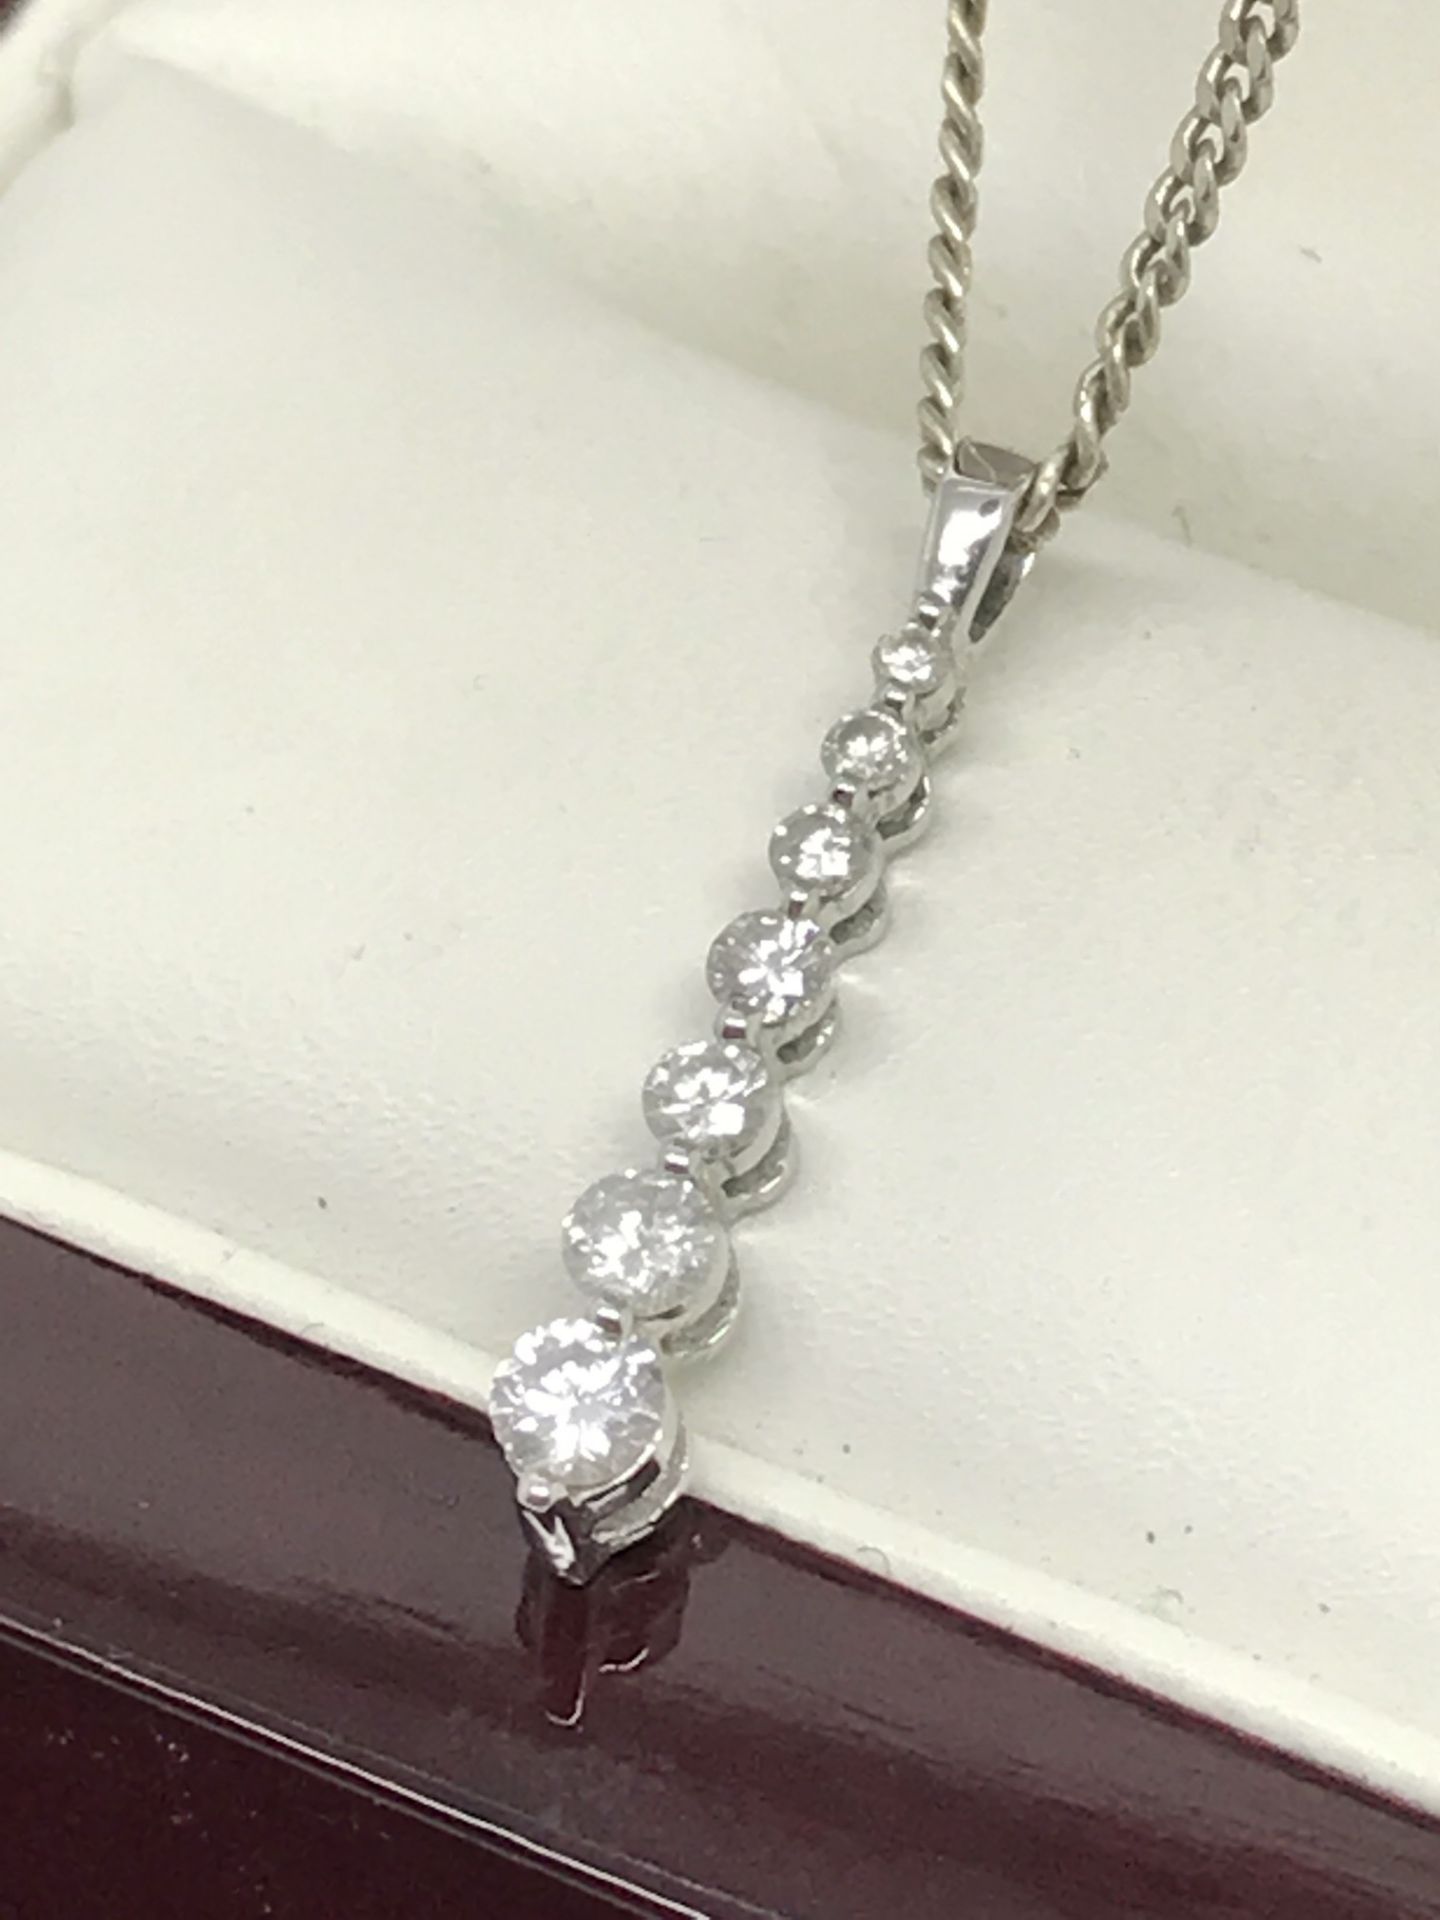 9ct GOLD MULTI DIAMOND PENDANT WITH SILVER 925 CHAIN - Image 2 of 3